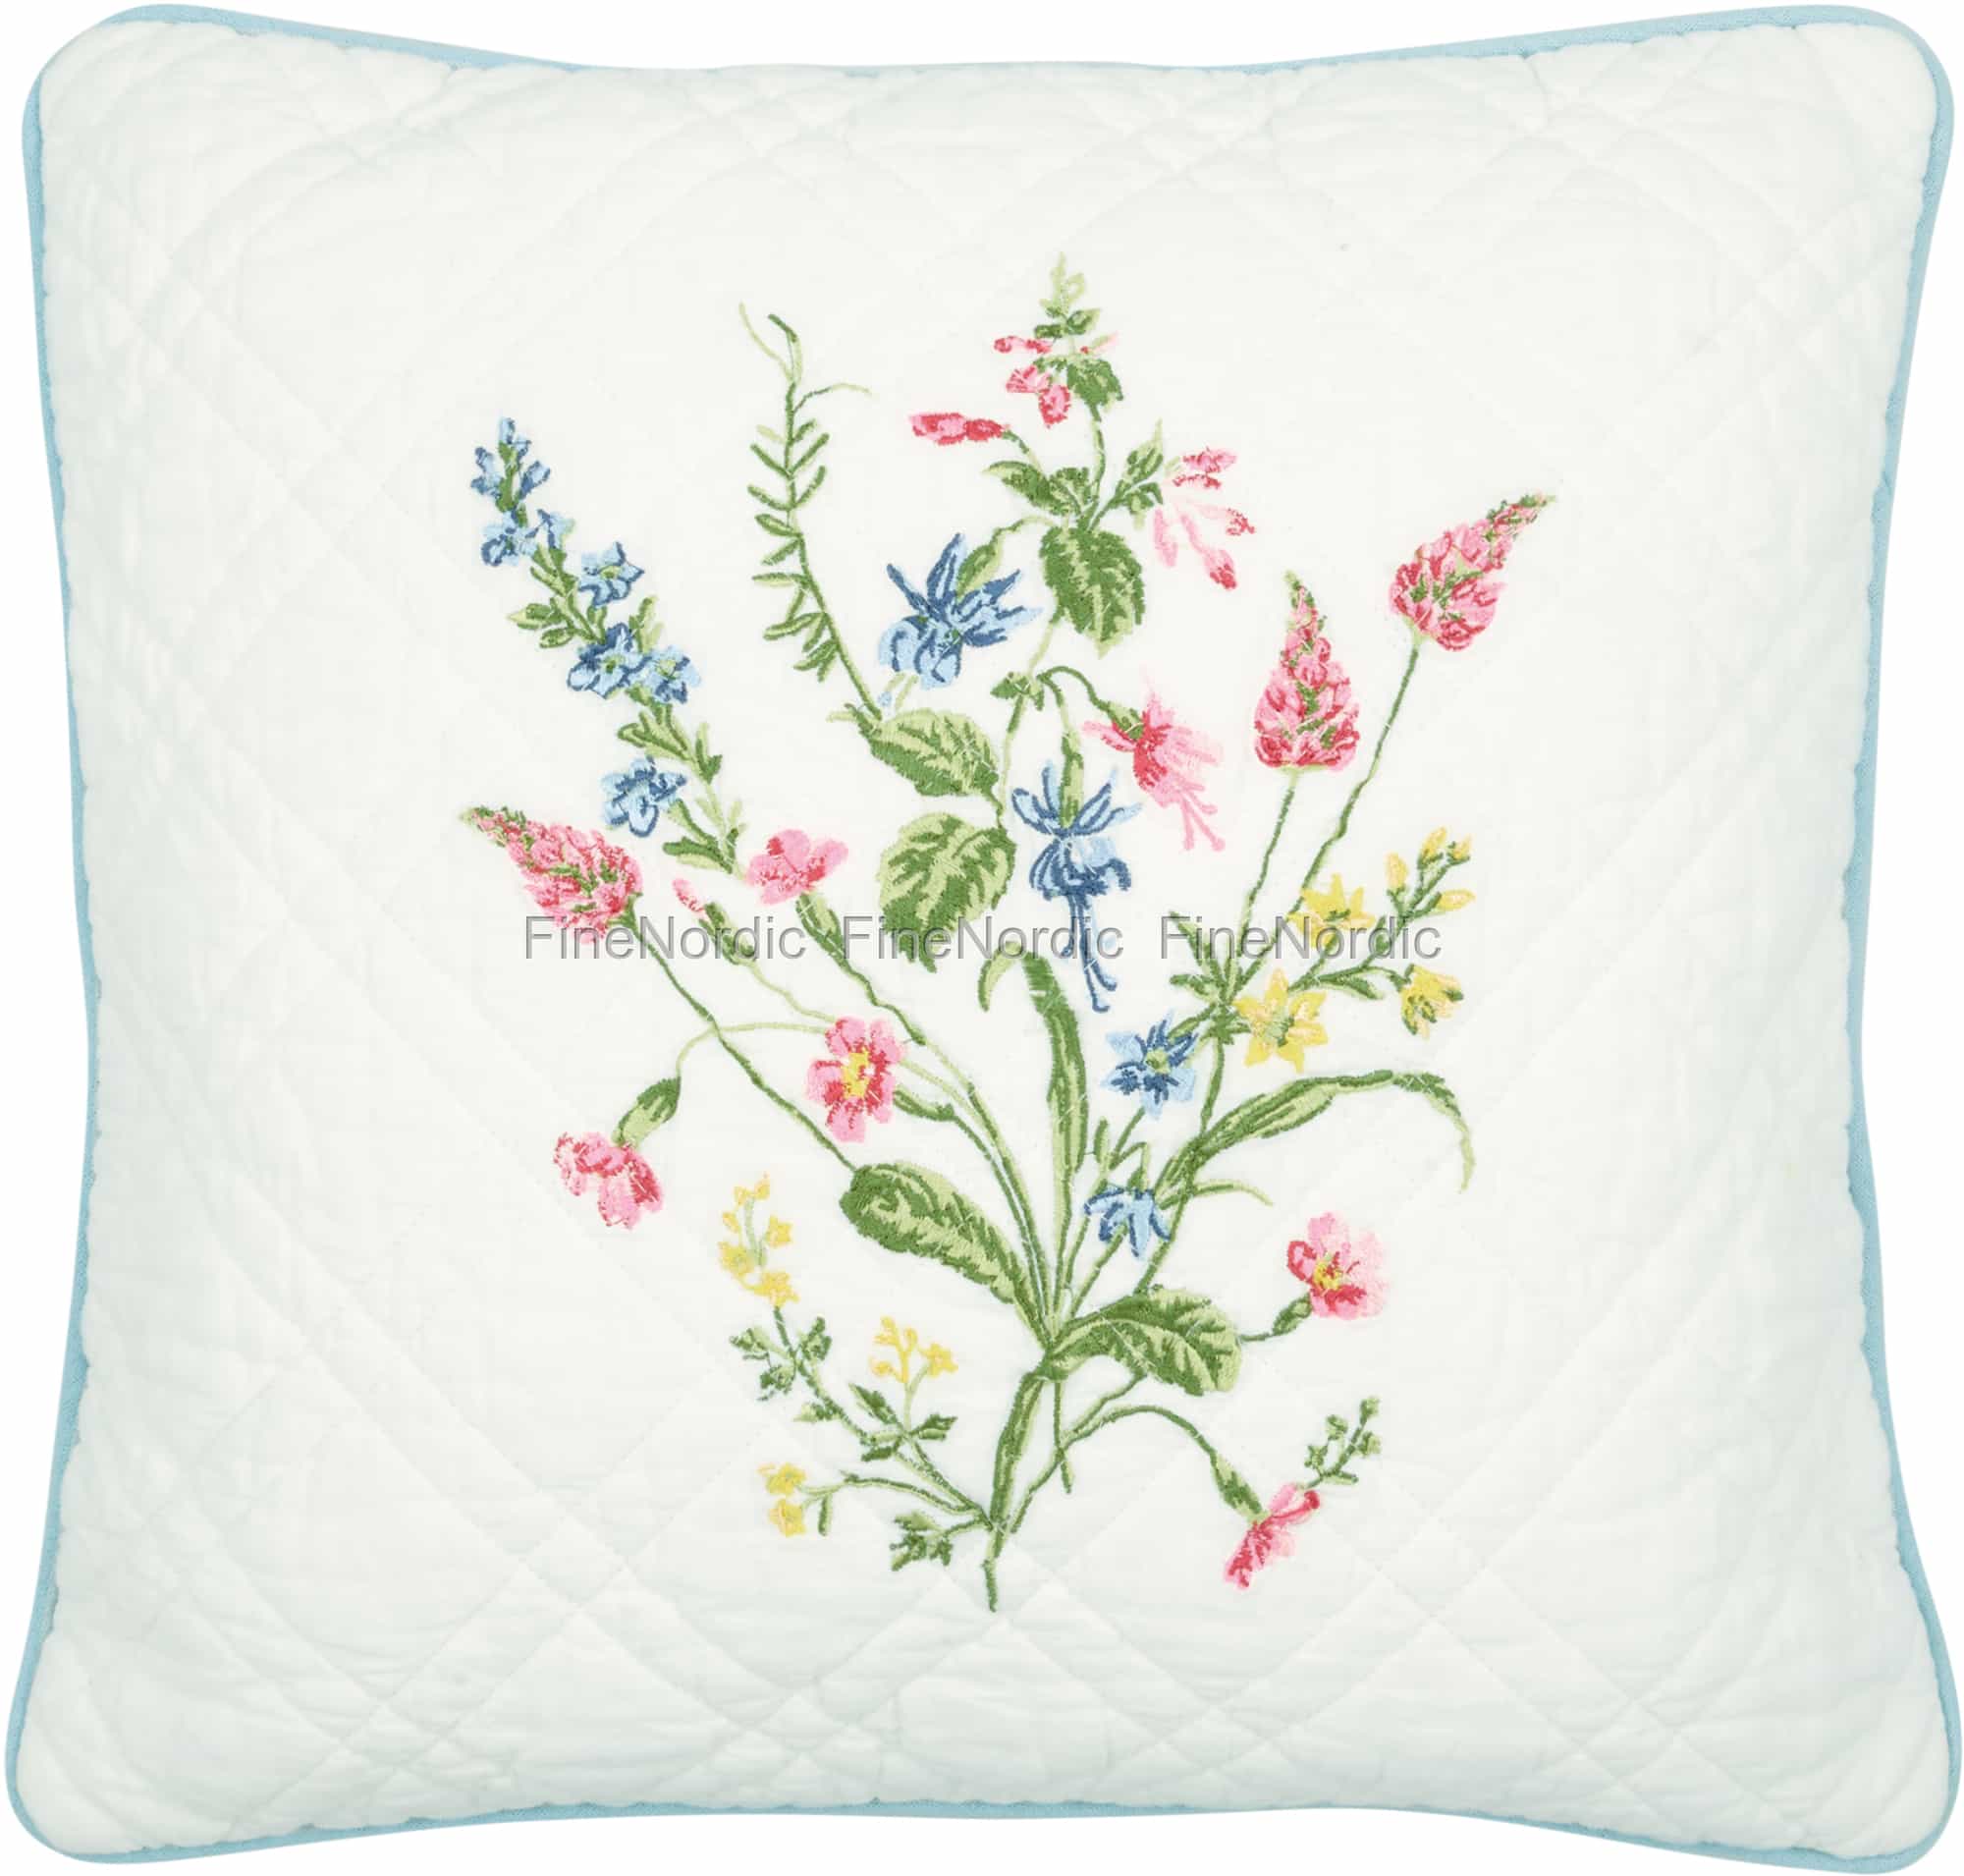 New Embroidery Square Cushion Cover Pillow Case Home Decor 17.50" x 17.50" 